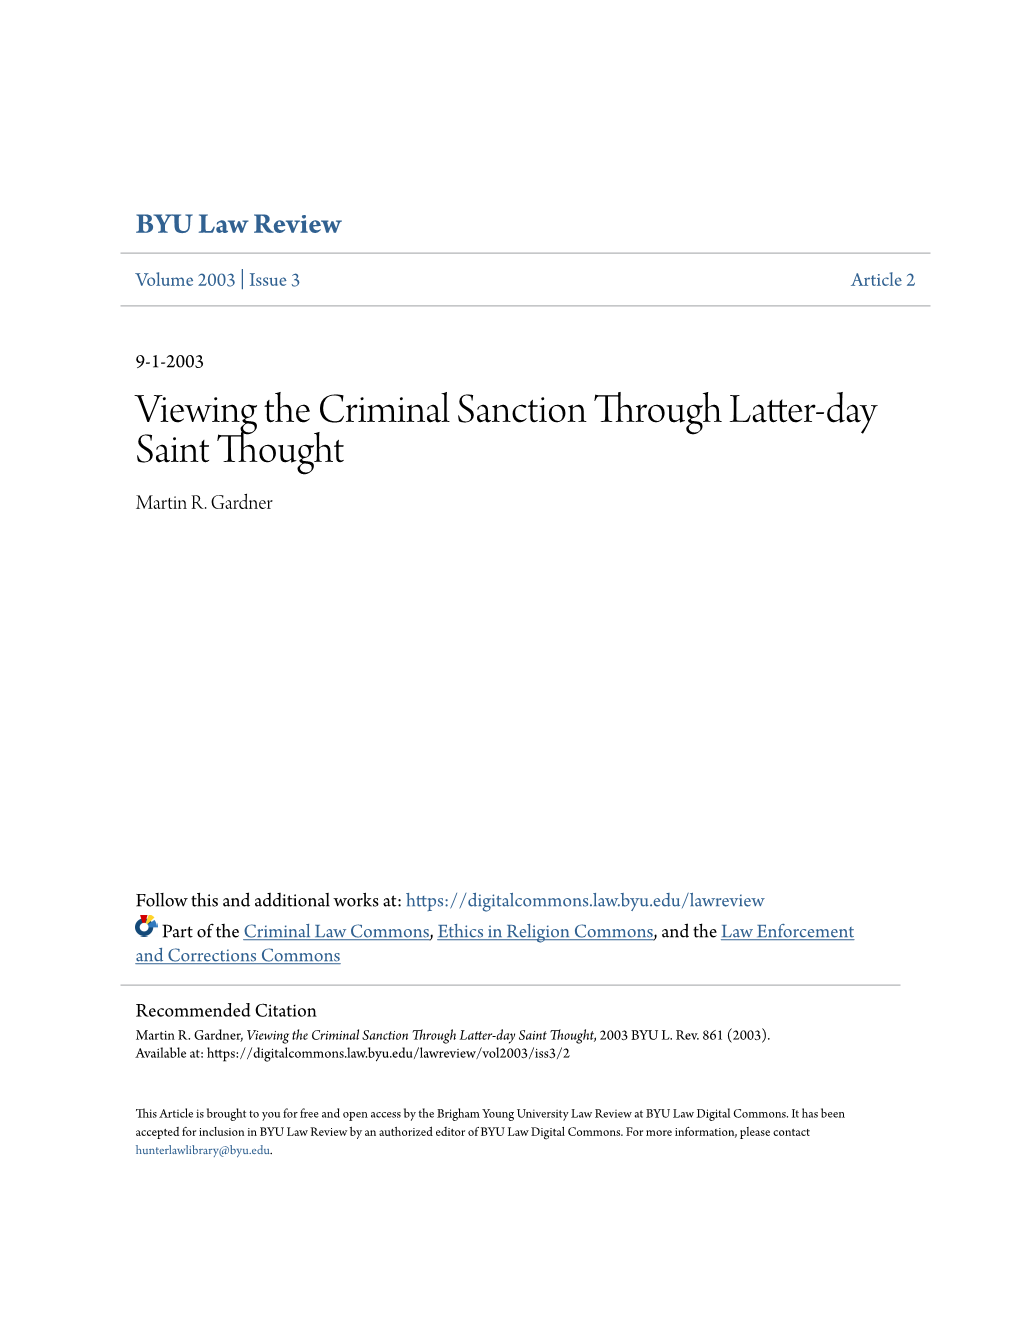 Viewing the Criminal Sanction Through Latter-Day Saint Thought Martin R